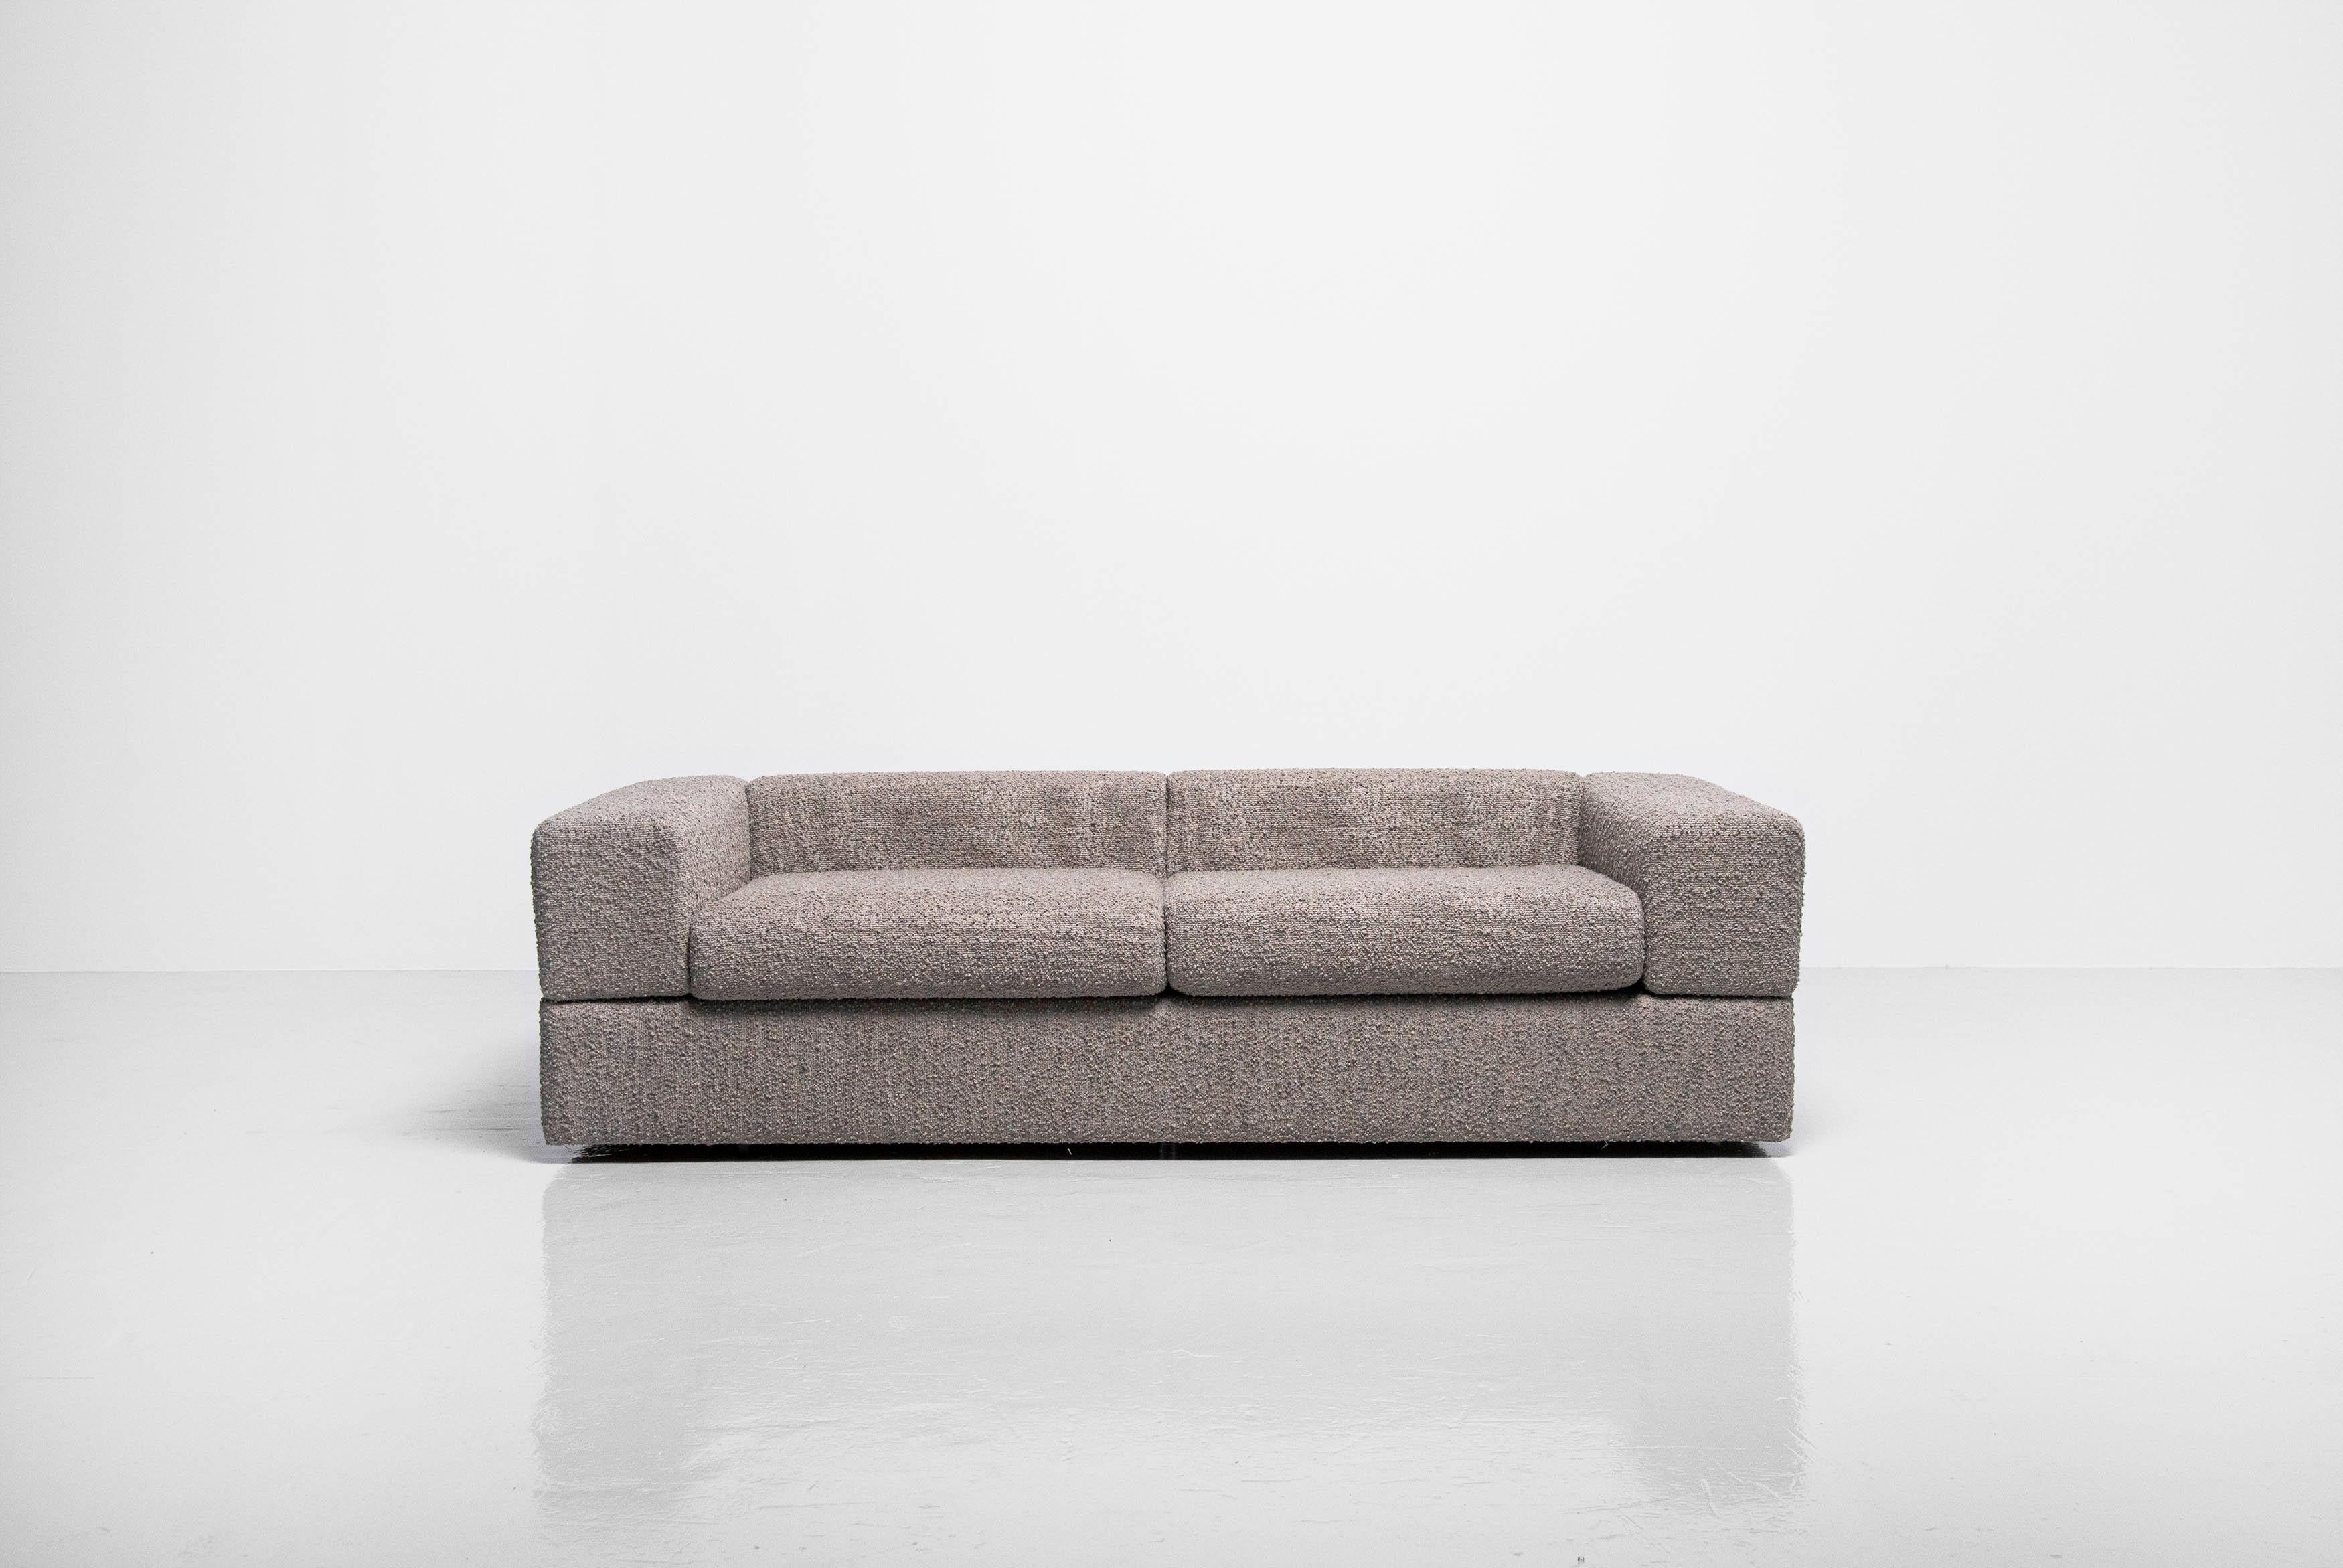 Very nice cosy and functional daybed sofa model 711 designed by Tito Agnoli and manufactured by Cinova, Italy 1968. The sofa has a wood structure covered with foam and fabric, with metal spring seat bottom. A mattress covered with white fabric and